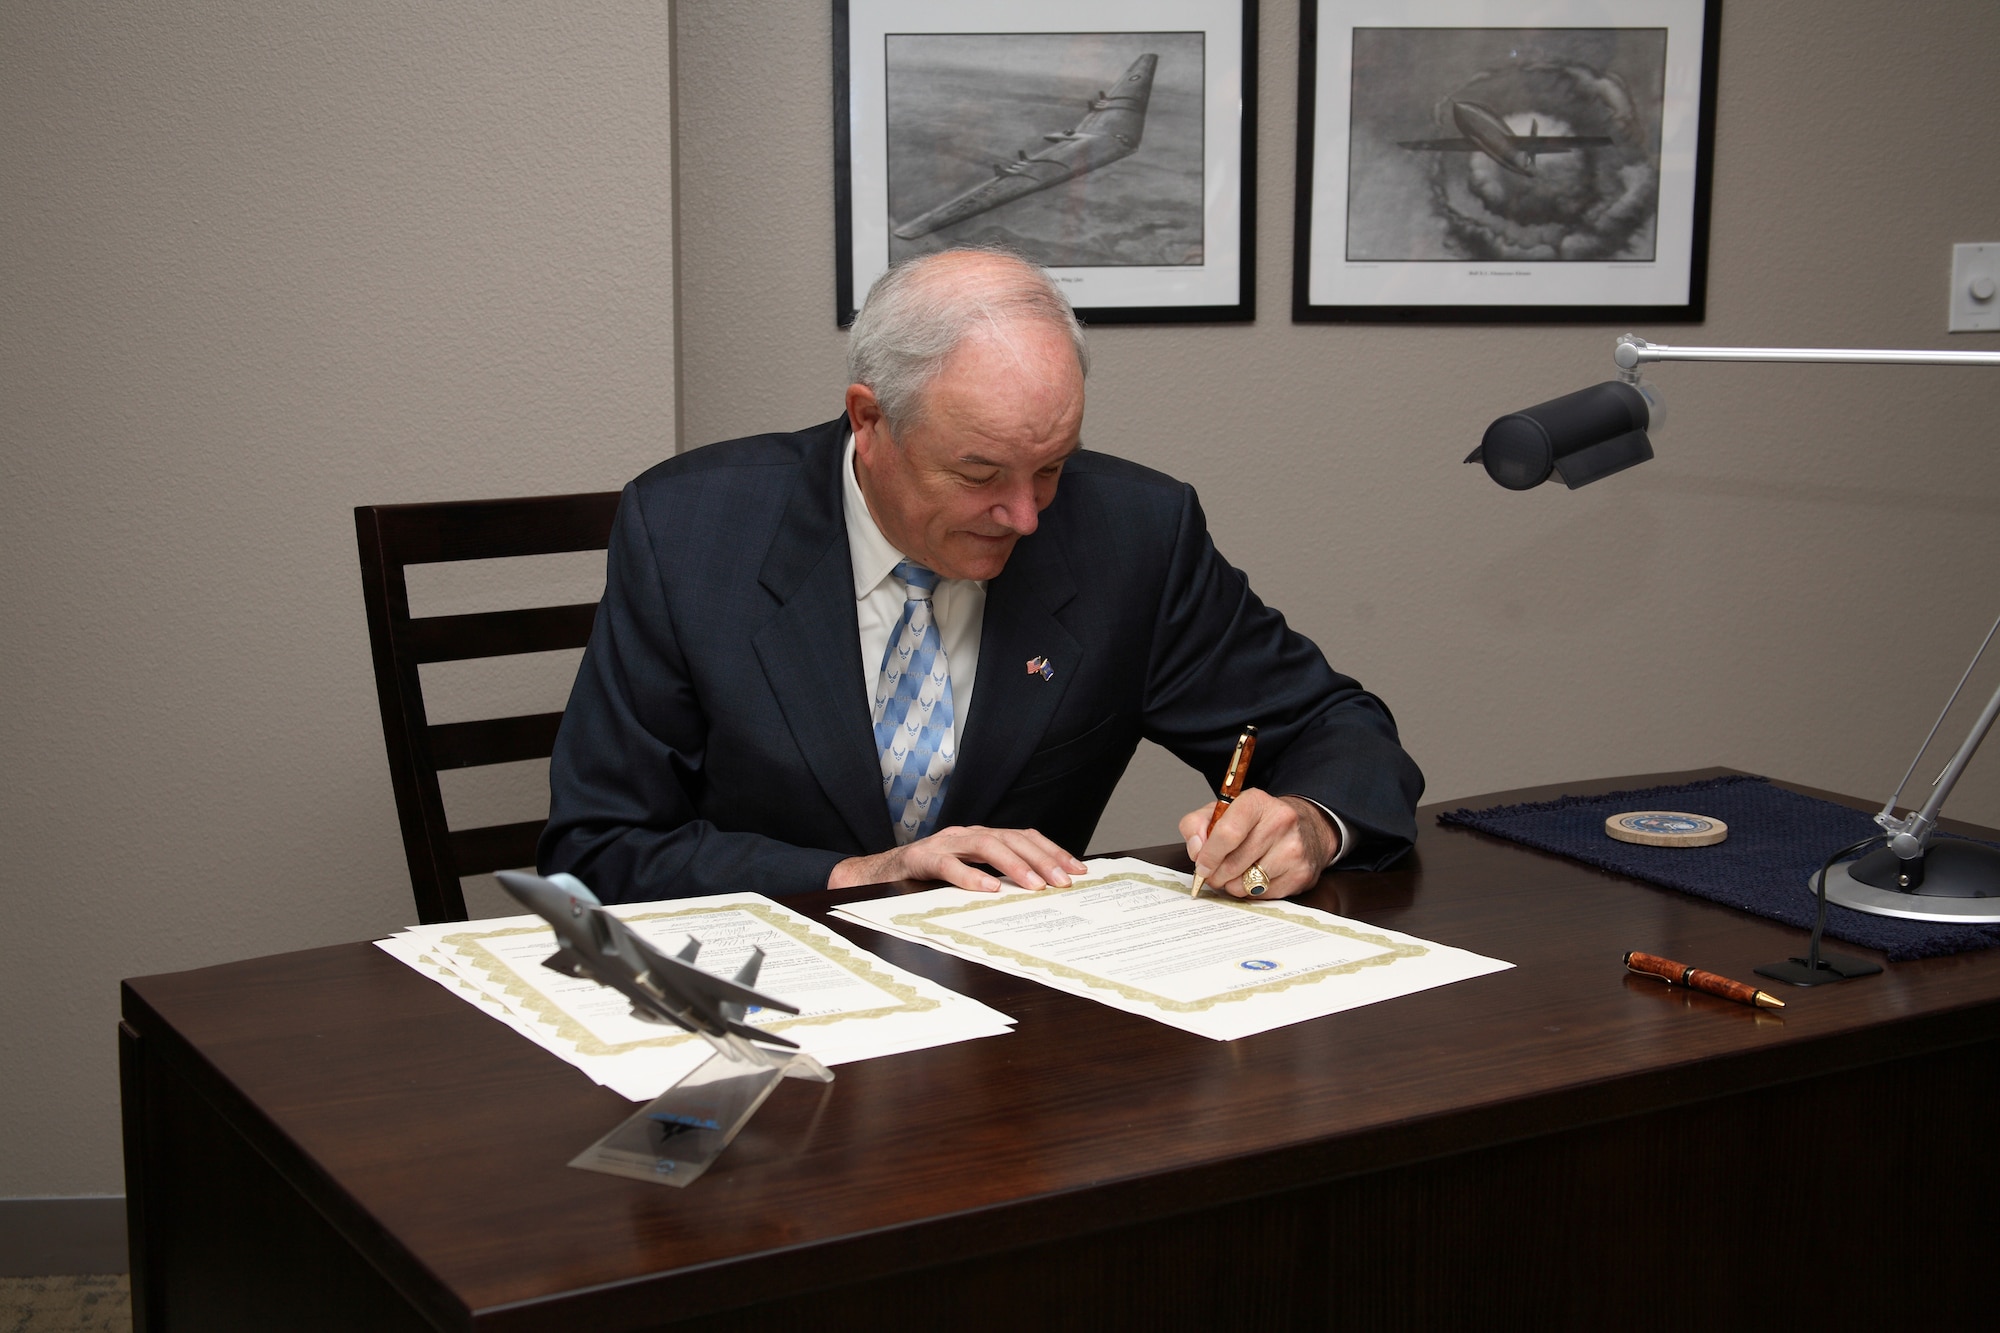 EDWARDS AIR FORCE BASE, Calif. -- Secretary of the Air Force Michael W. Wynne signs several copies of a document here Aug. 8, certifying Fischer-Tropsch synthetic fuel blends for use in the B-52H. (Photo by Jet Fabara)